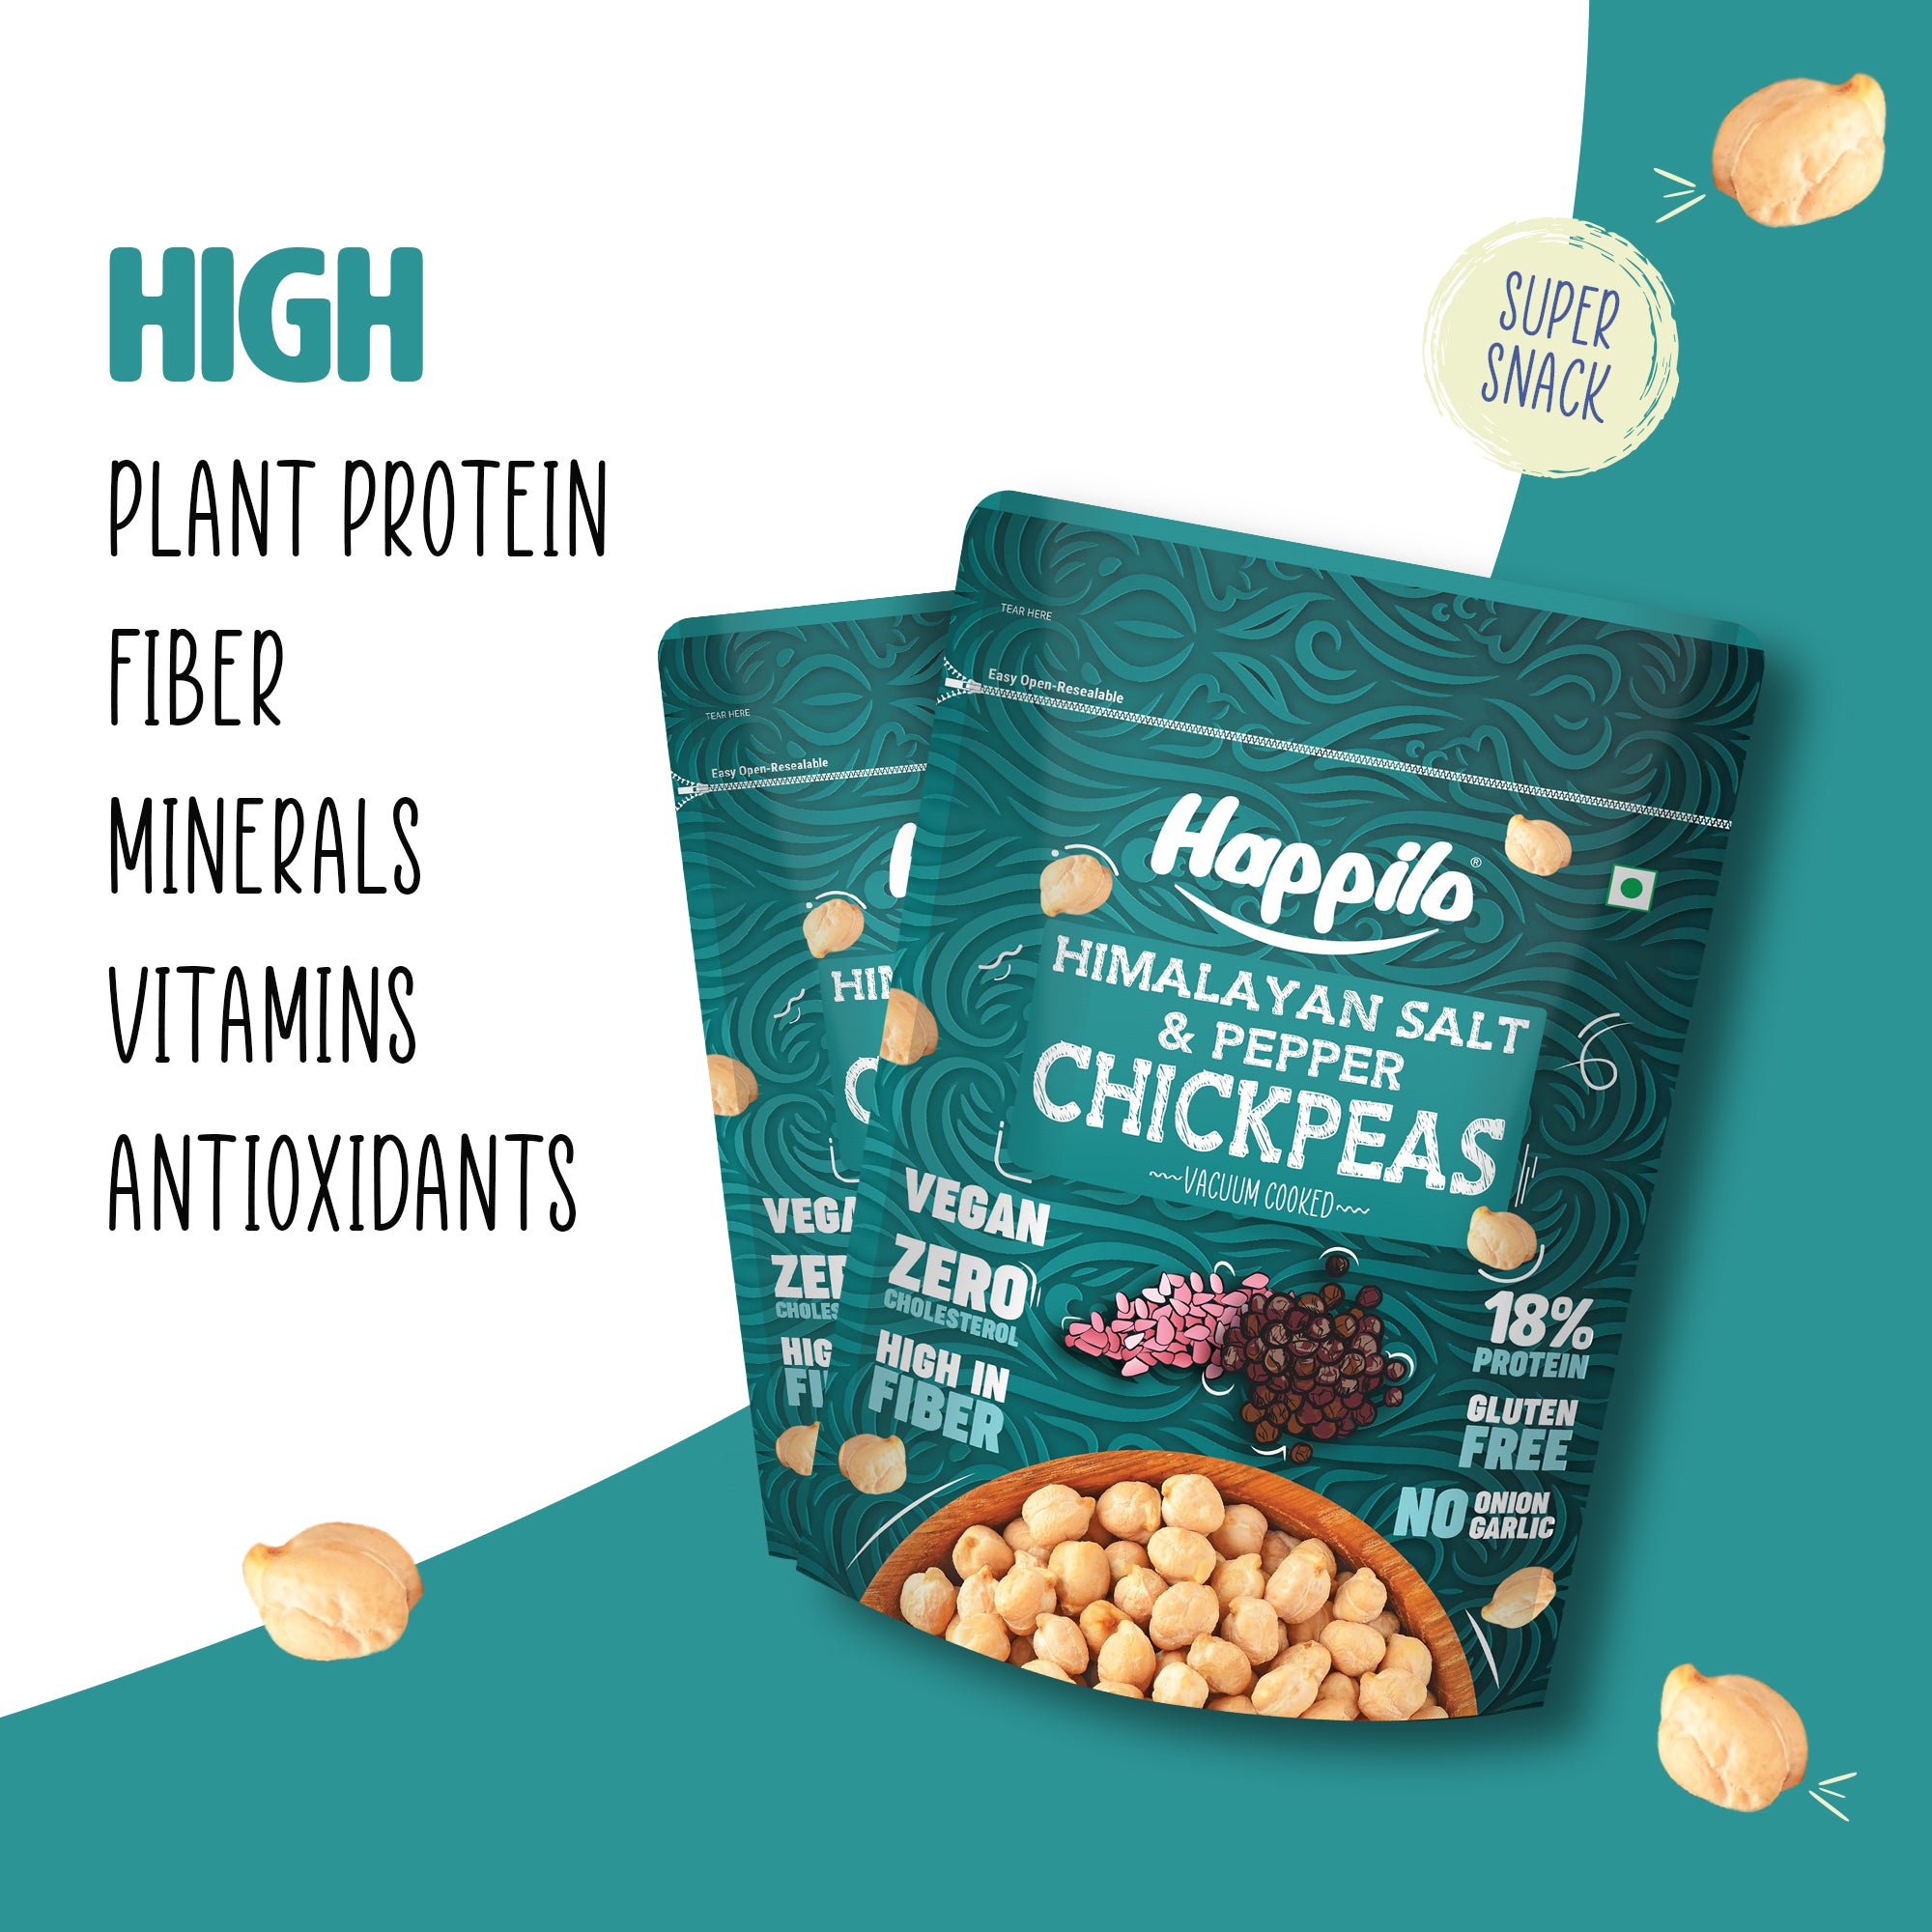 Happilo Premium Super Snack Himalayan Salt & Pepper Chickpeas 110g, Crunchy and Delicious, Super Healthy